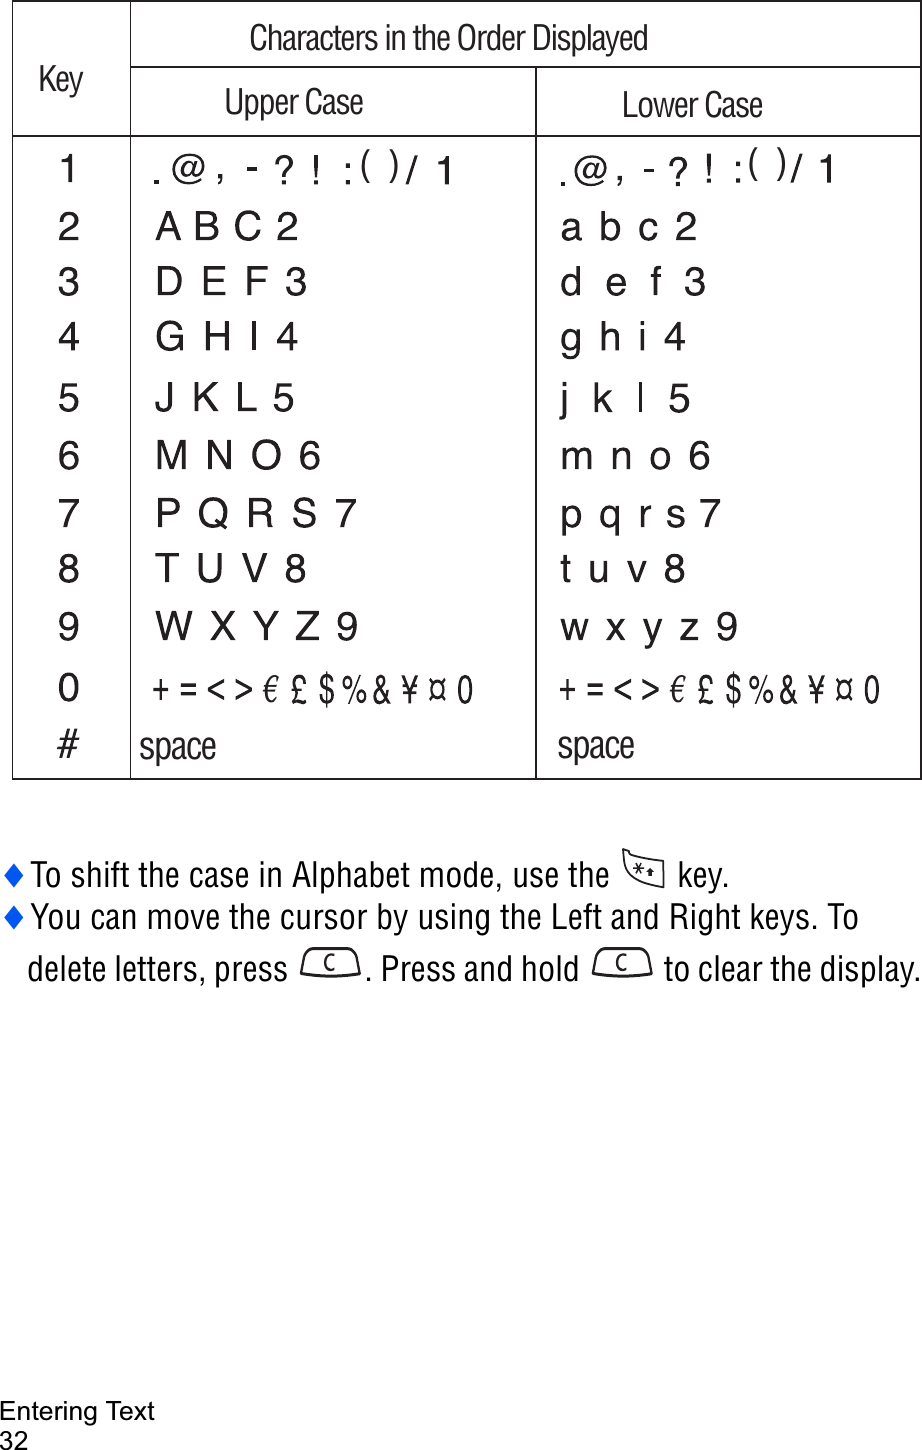 Entering Text32iTo shift the case in Alphabet mode, use the   key. iYou can move the cursor by using the Left and Right keys. To delete letters, press  . Press and hold   to clear the display. Characters in the Order DisplayedUpper Case Lower CaseKey€(  )space space€(  )